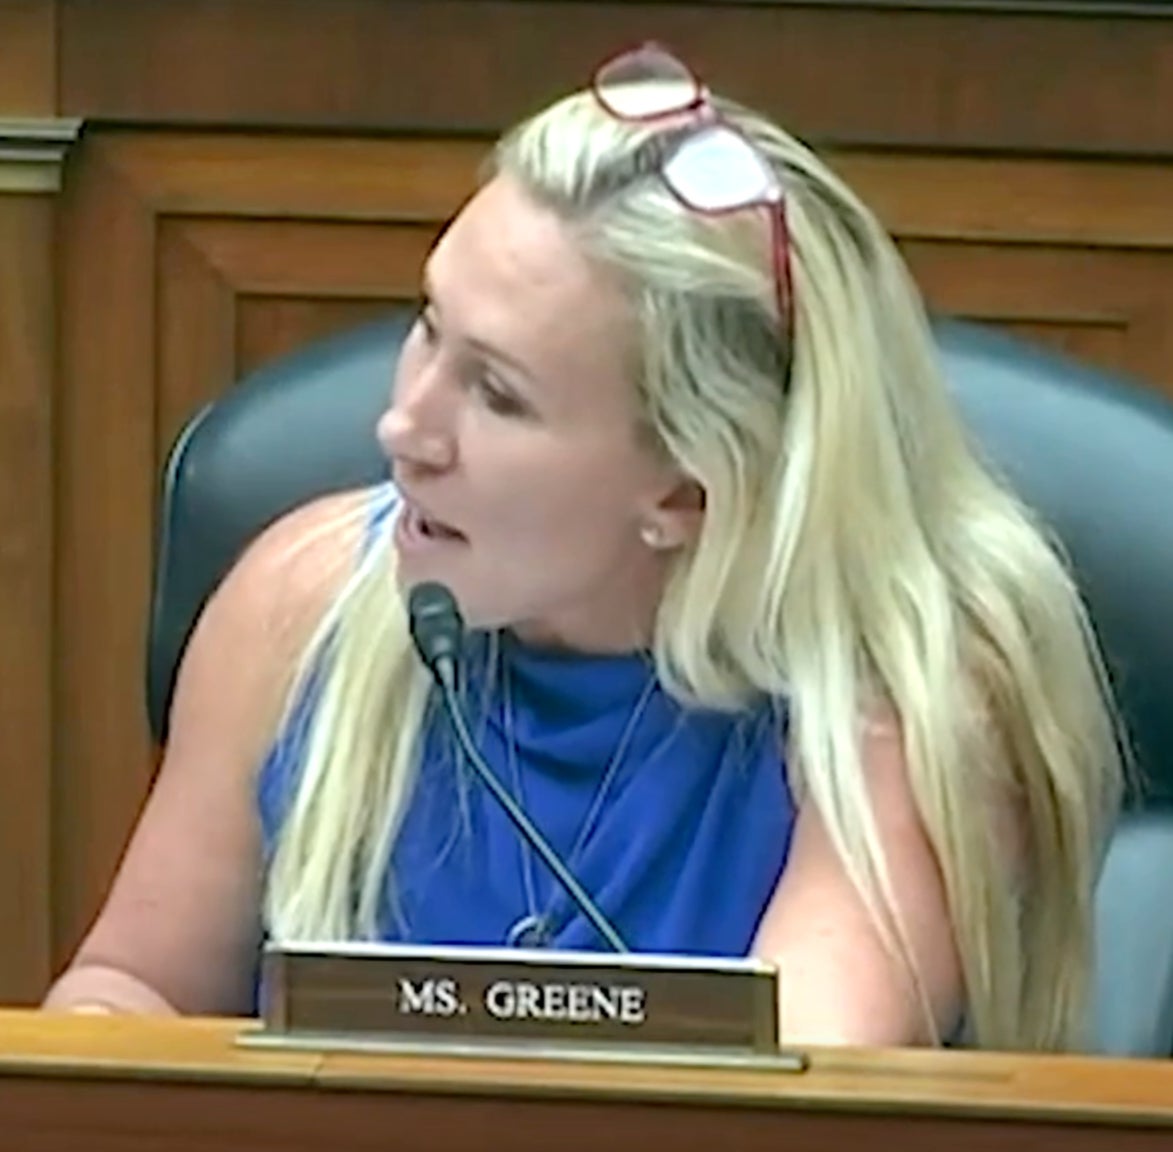 Representative Marjorie Taylor Greene (R-Ga.) engaged in a vicious war of words with Representative Jasmine Crockett (D-Tex.), mocking her for wearing “fake eyelashes.”